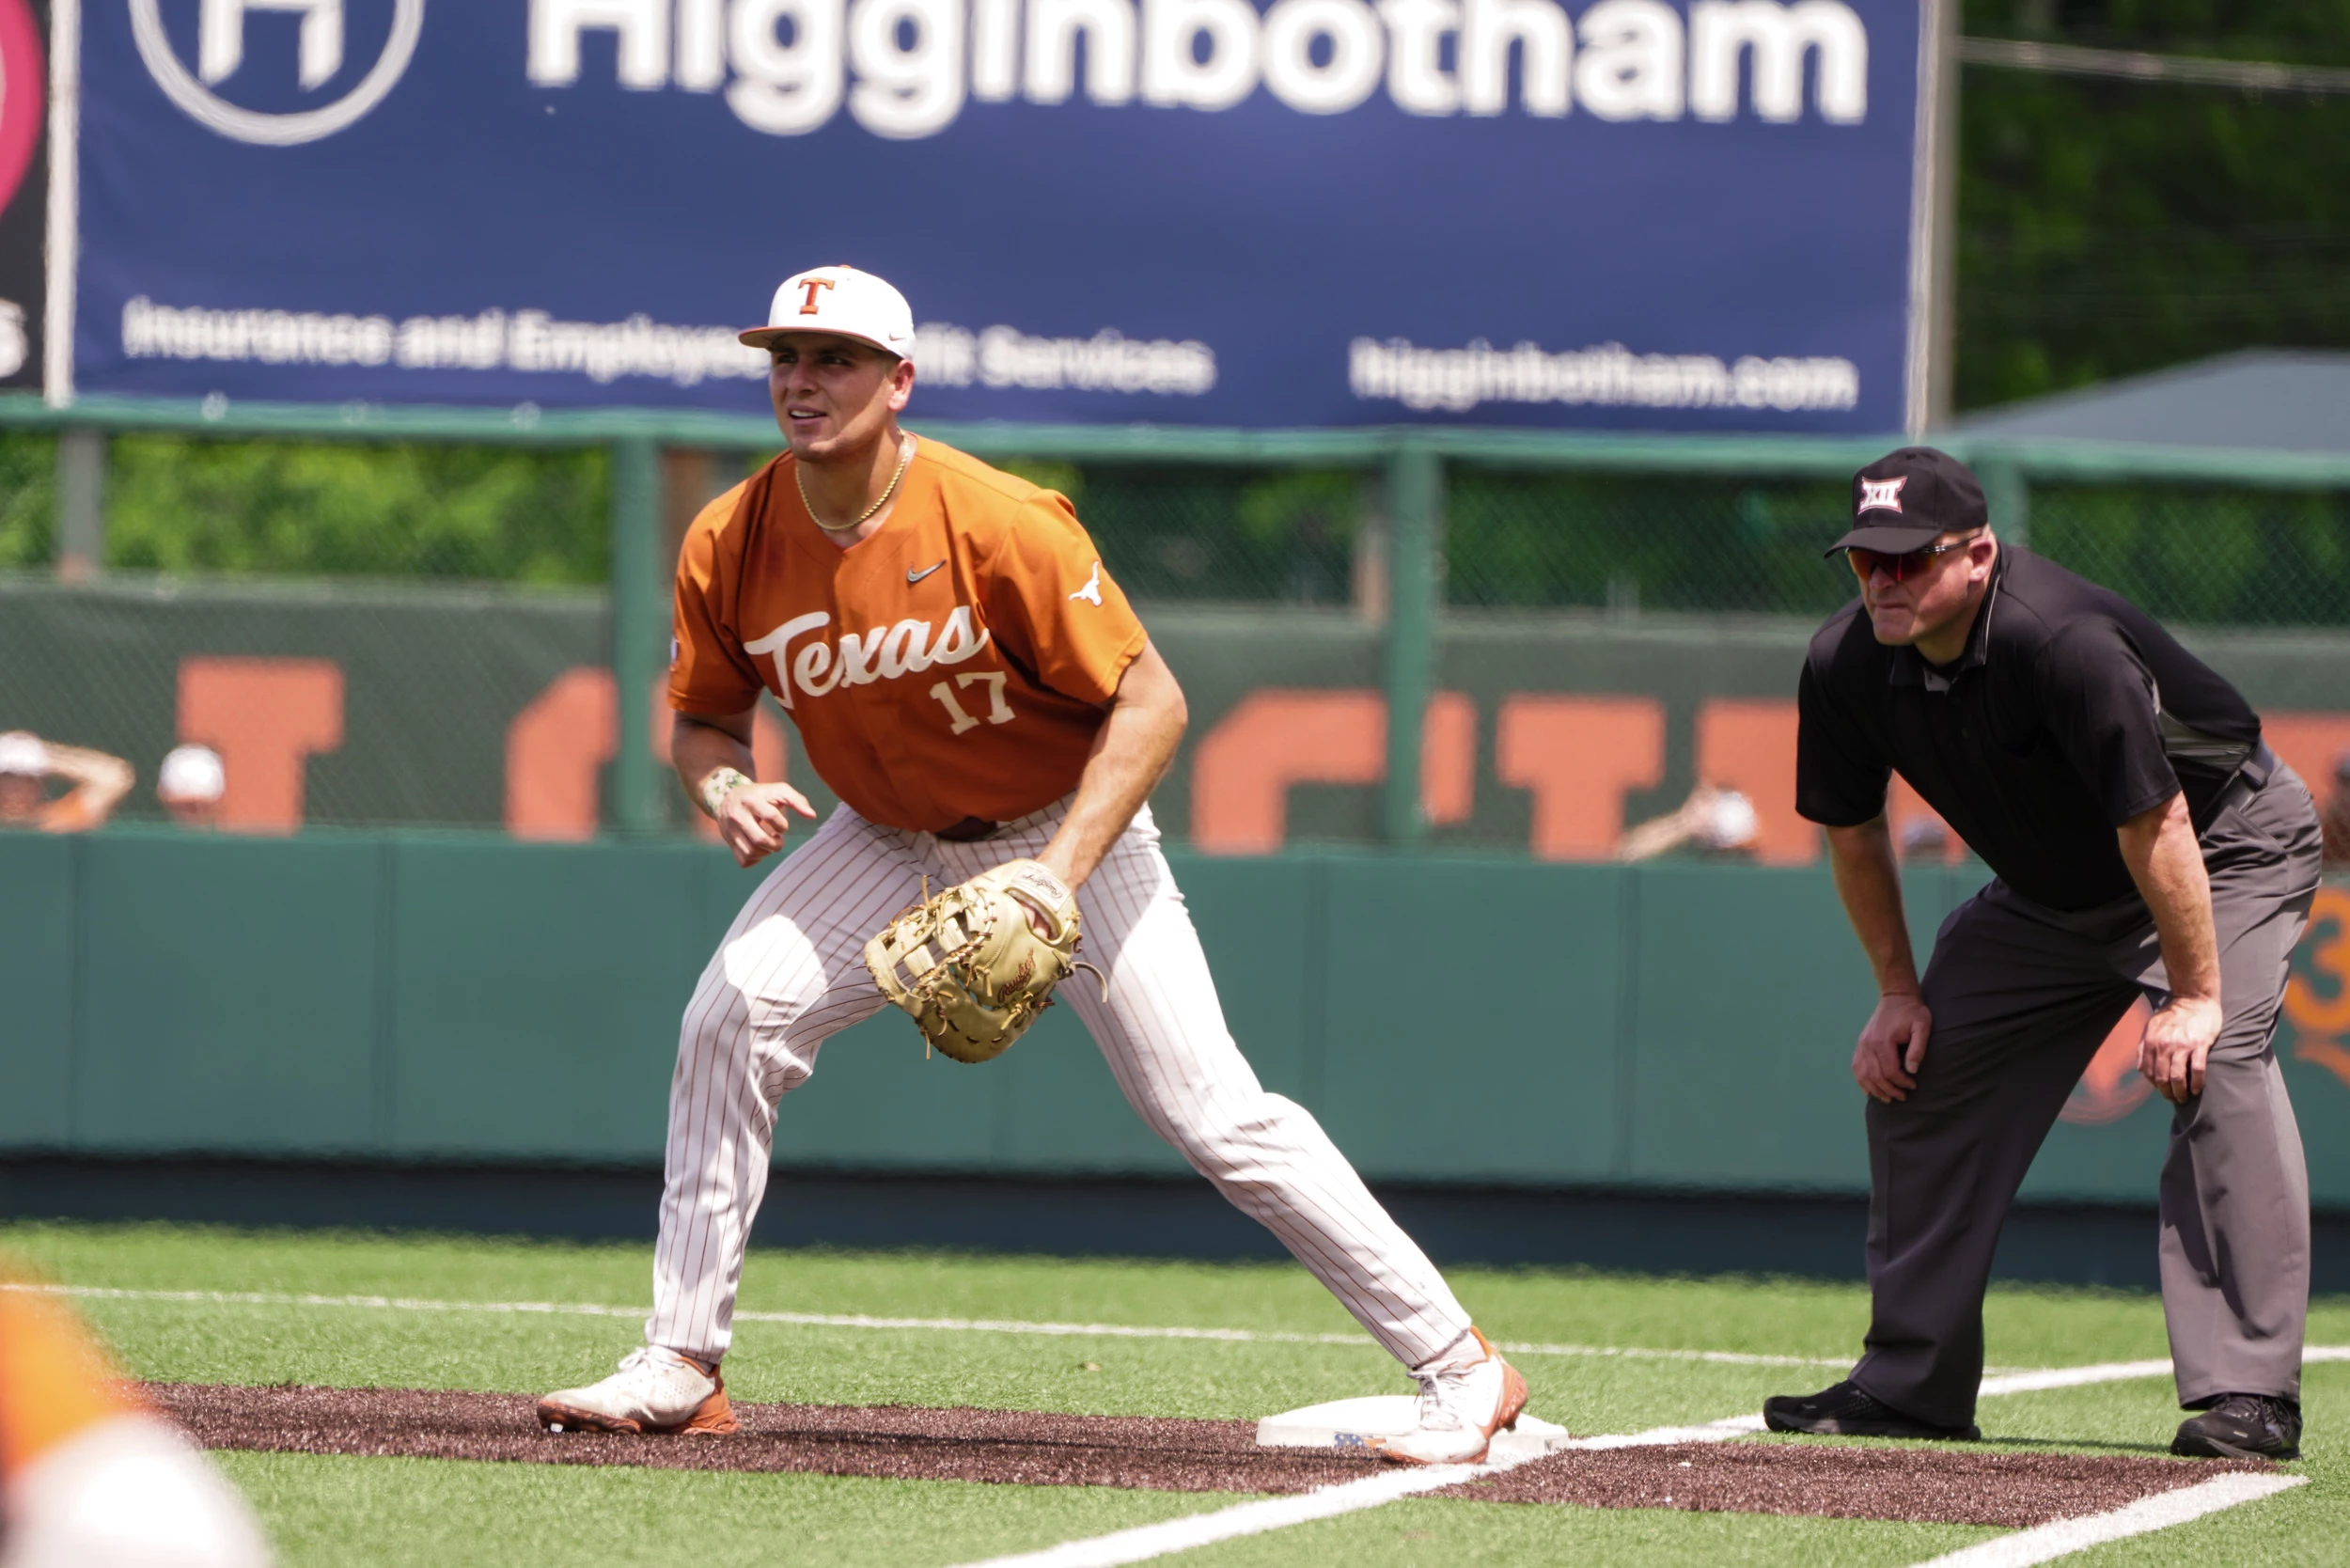 Texas' Ivan Melendez a candidate to have his jersey retired